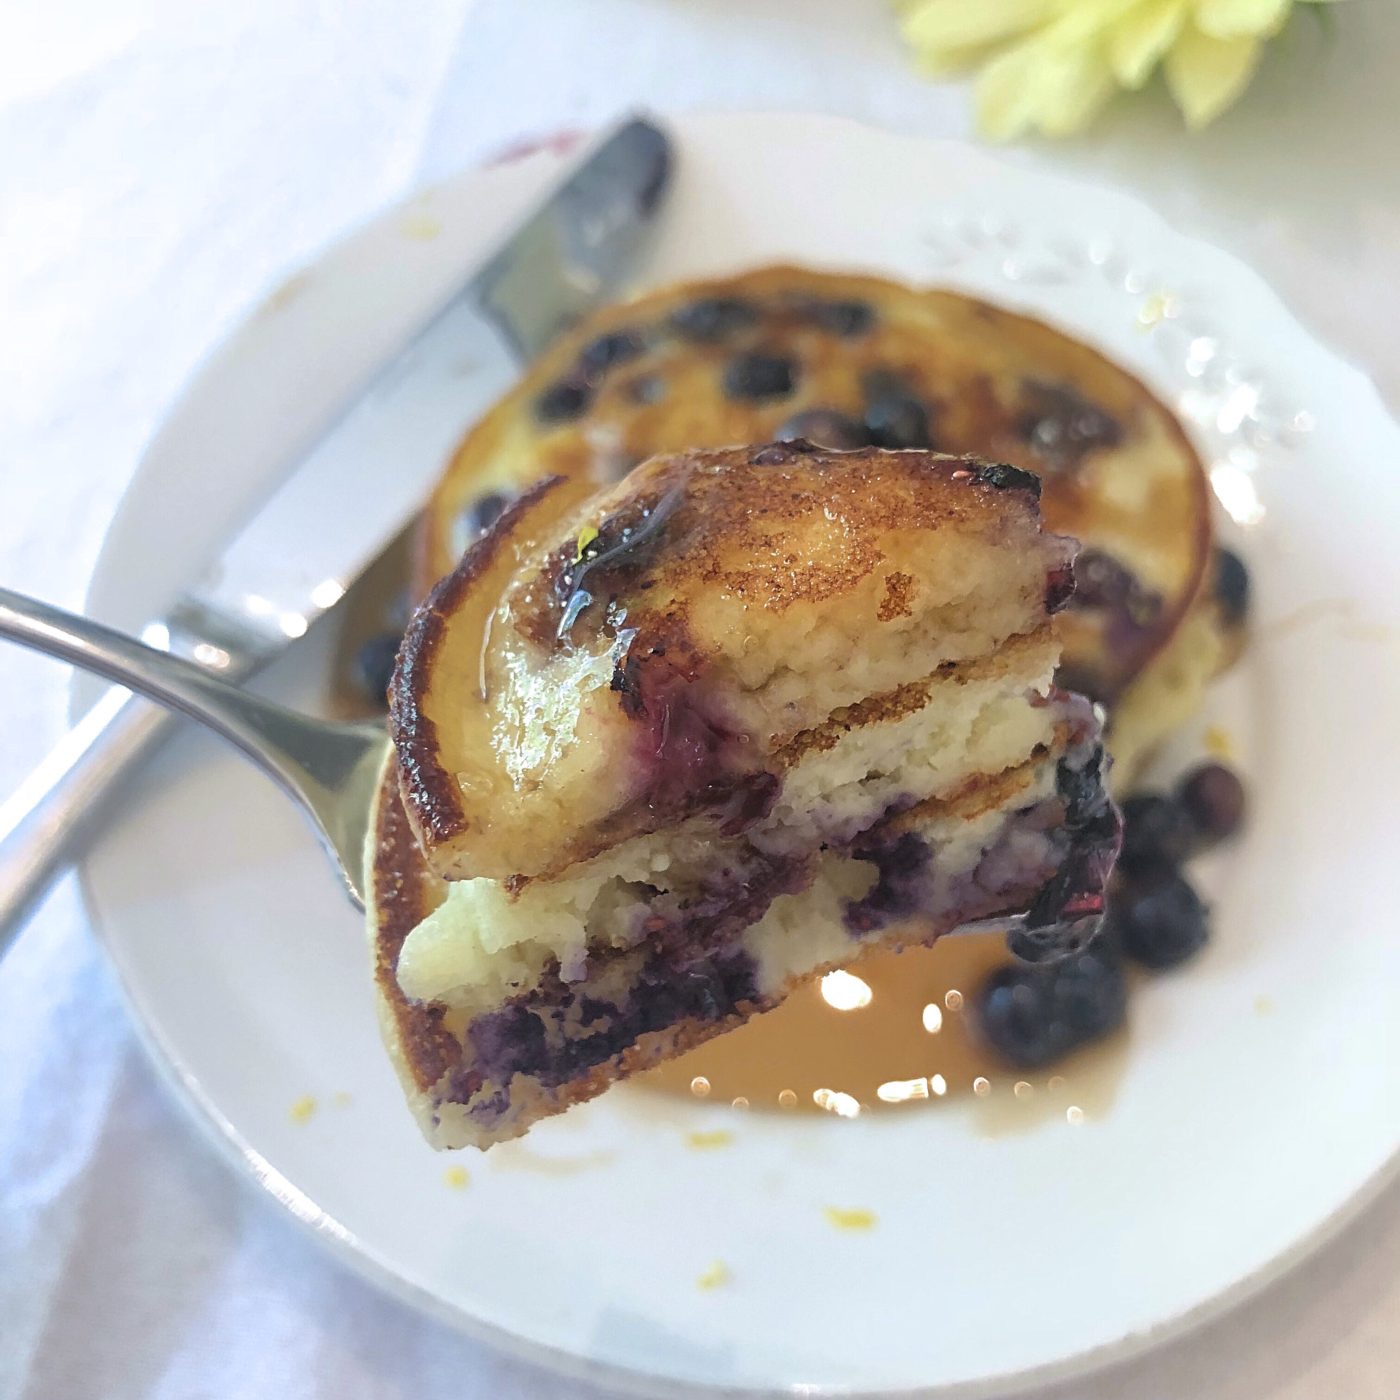 Delicious and easy brunch with fresh Blueberry and Lemon Ricotta Pancakes!